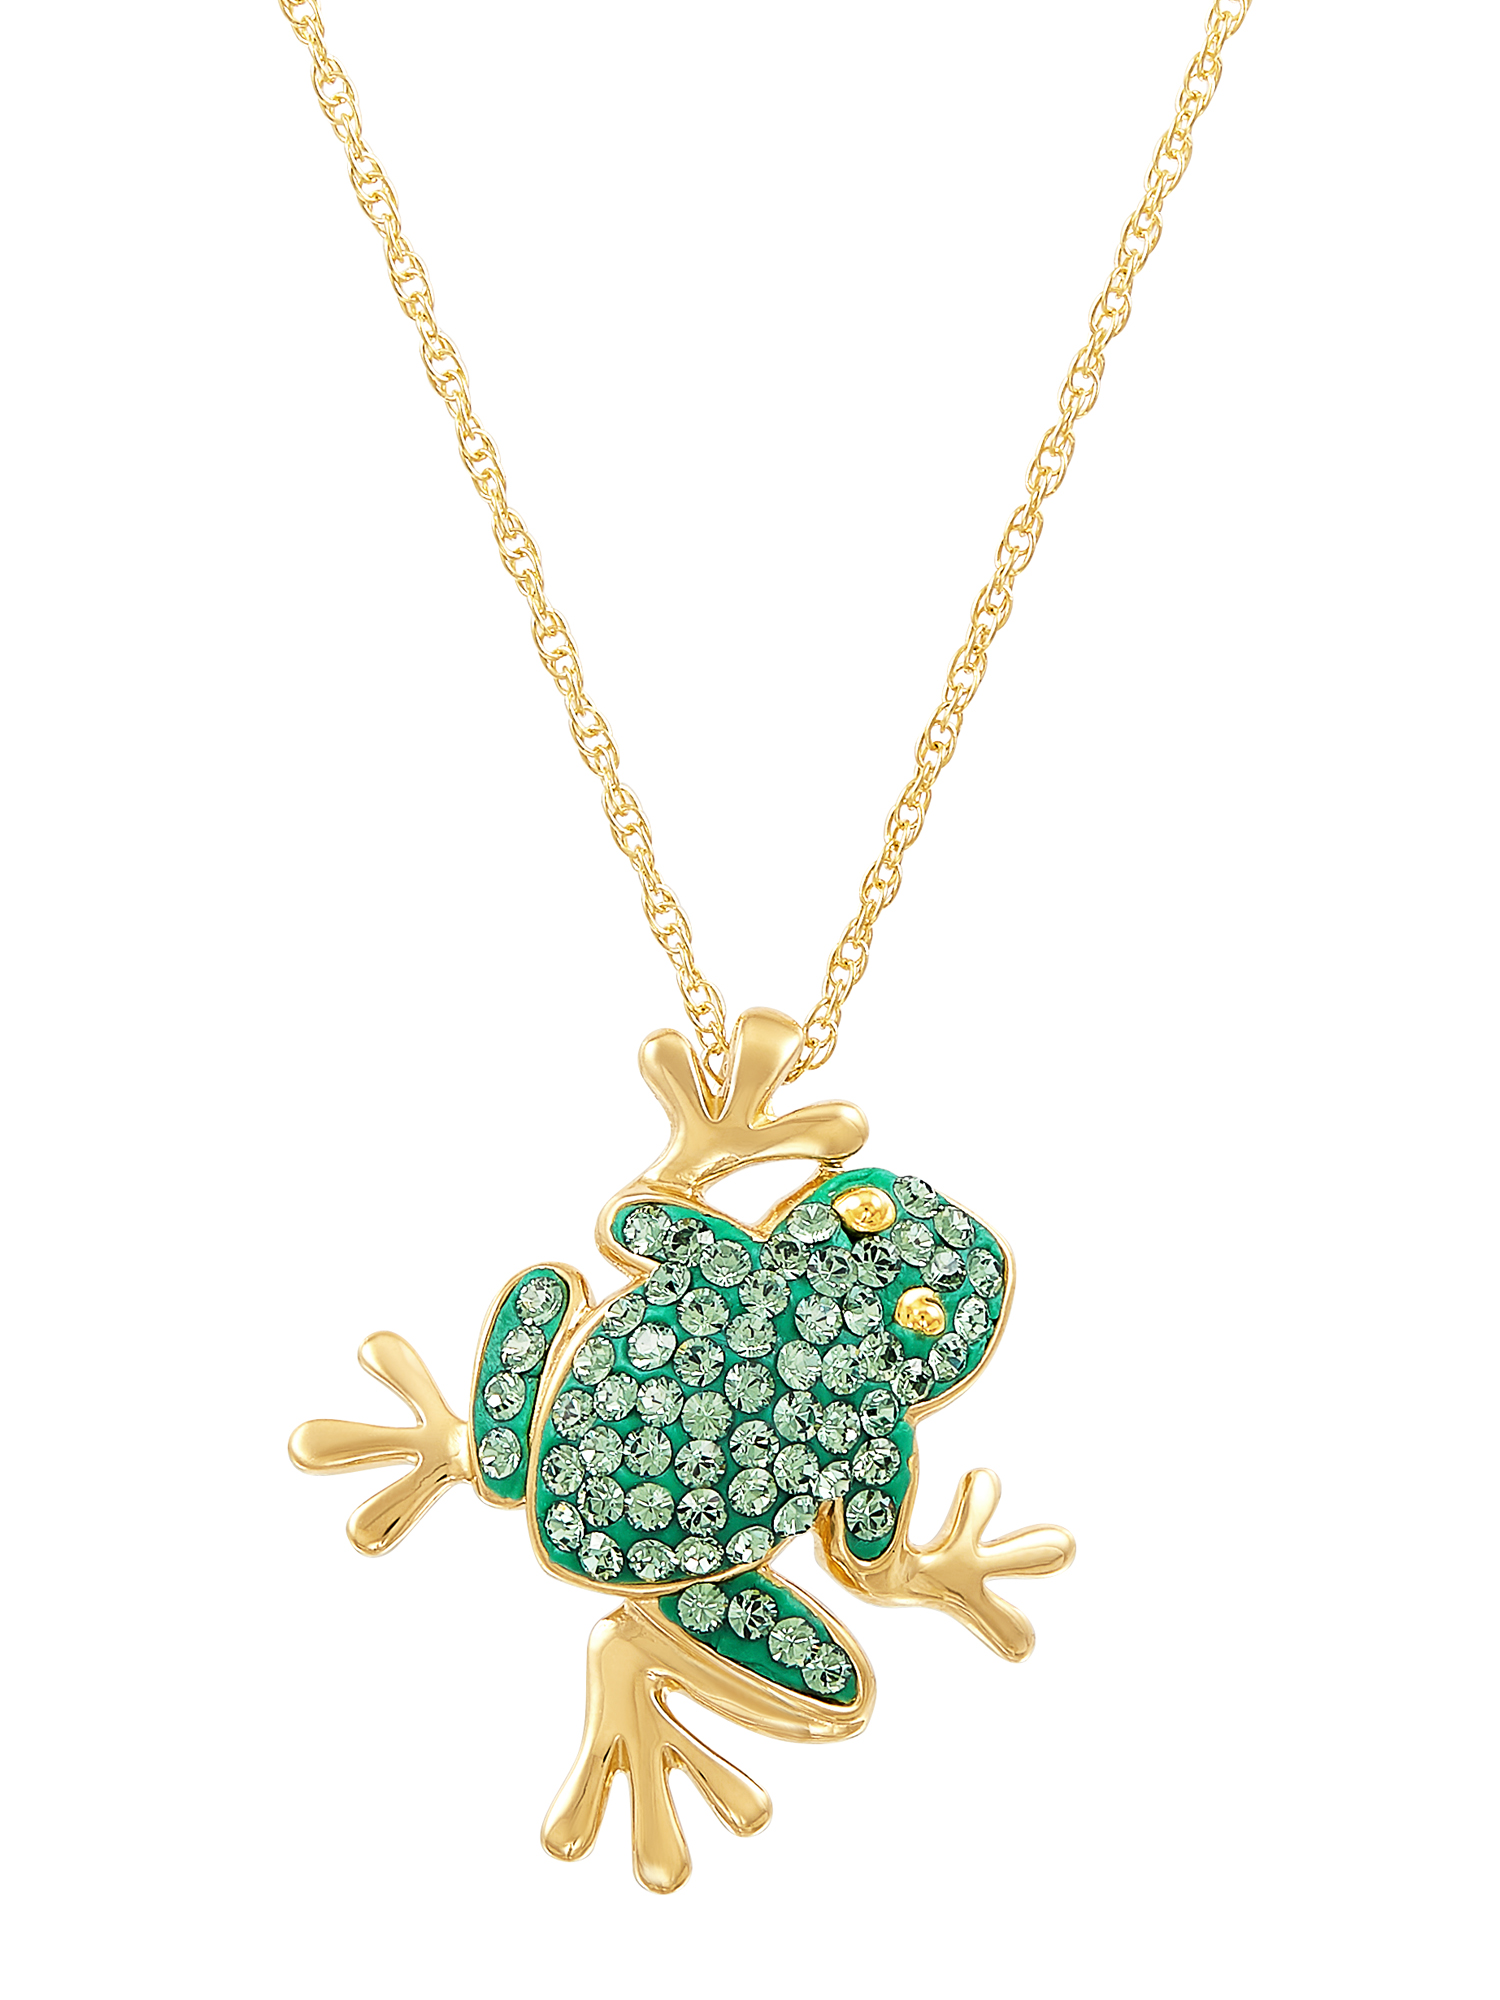 Brilliance Fine Jewelry 18kt Gold over Sterling Silver Frog Pendant made with Crystals, 18" Necklace - image 1 of 4